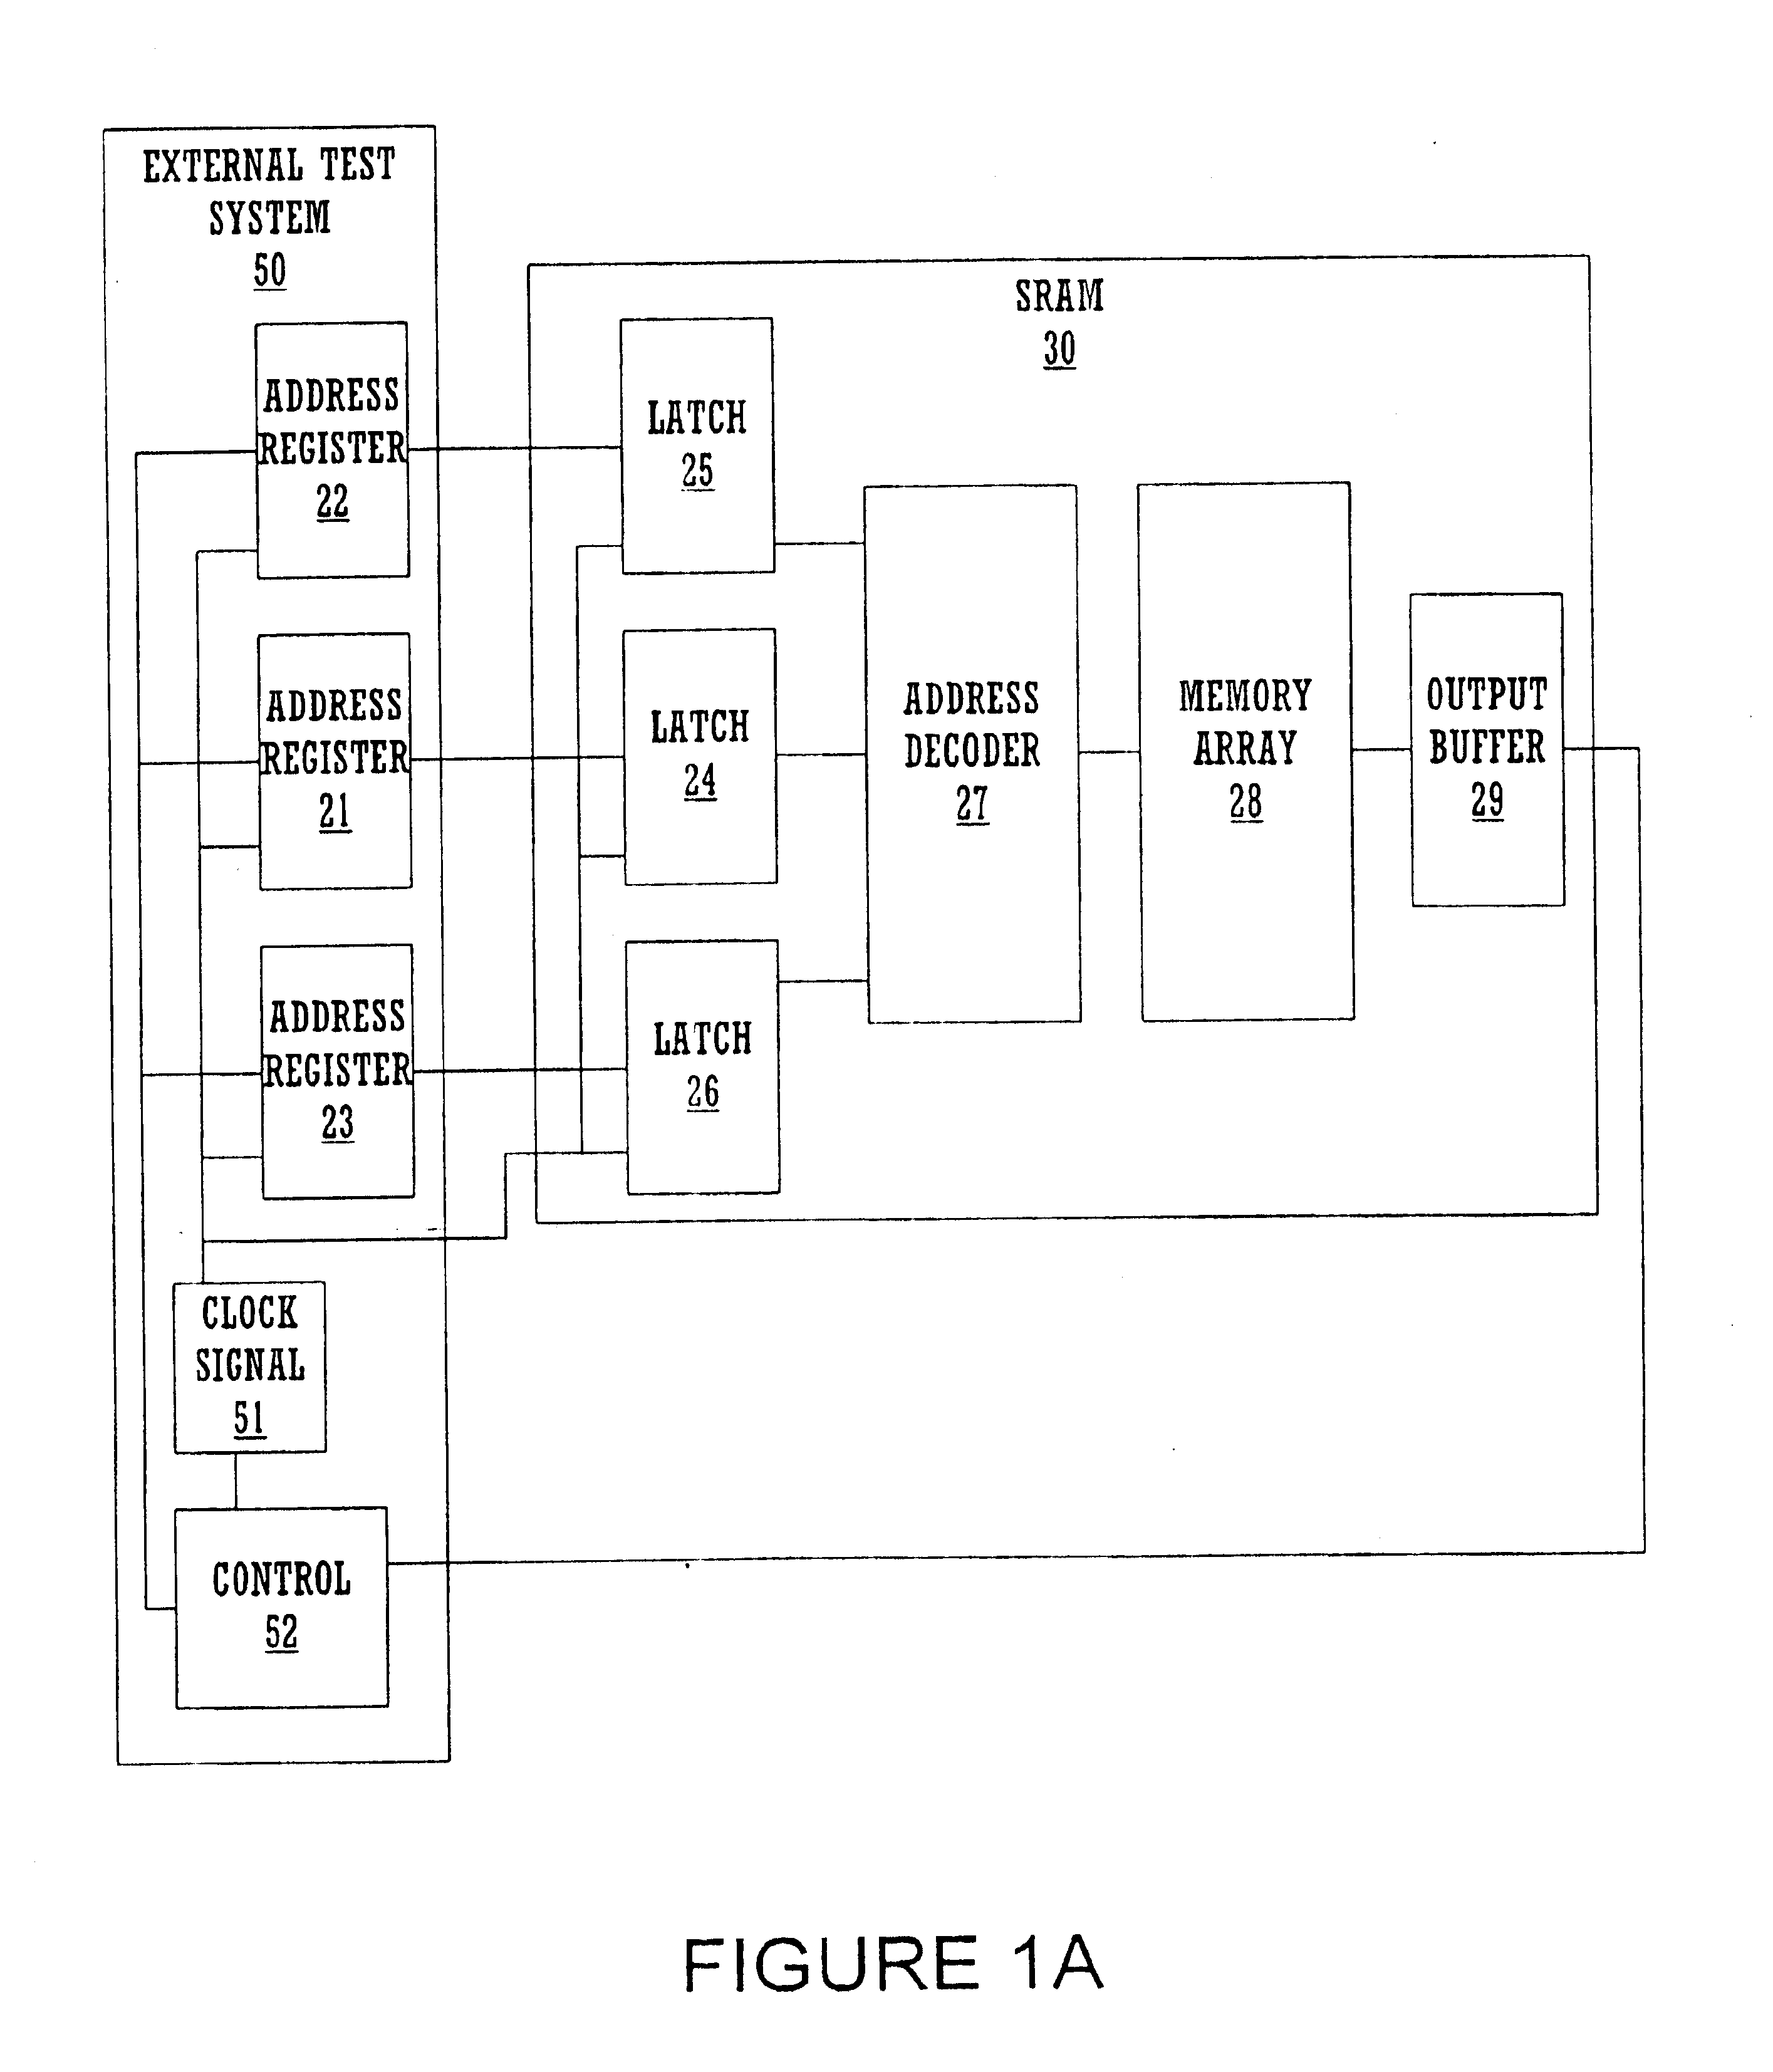 Method and circuit for setup and hold detect pass-fail test mode